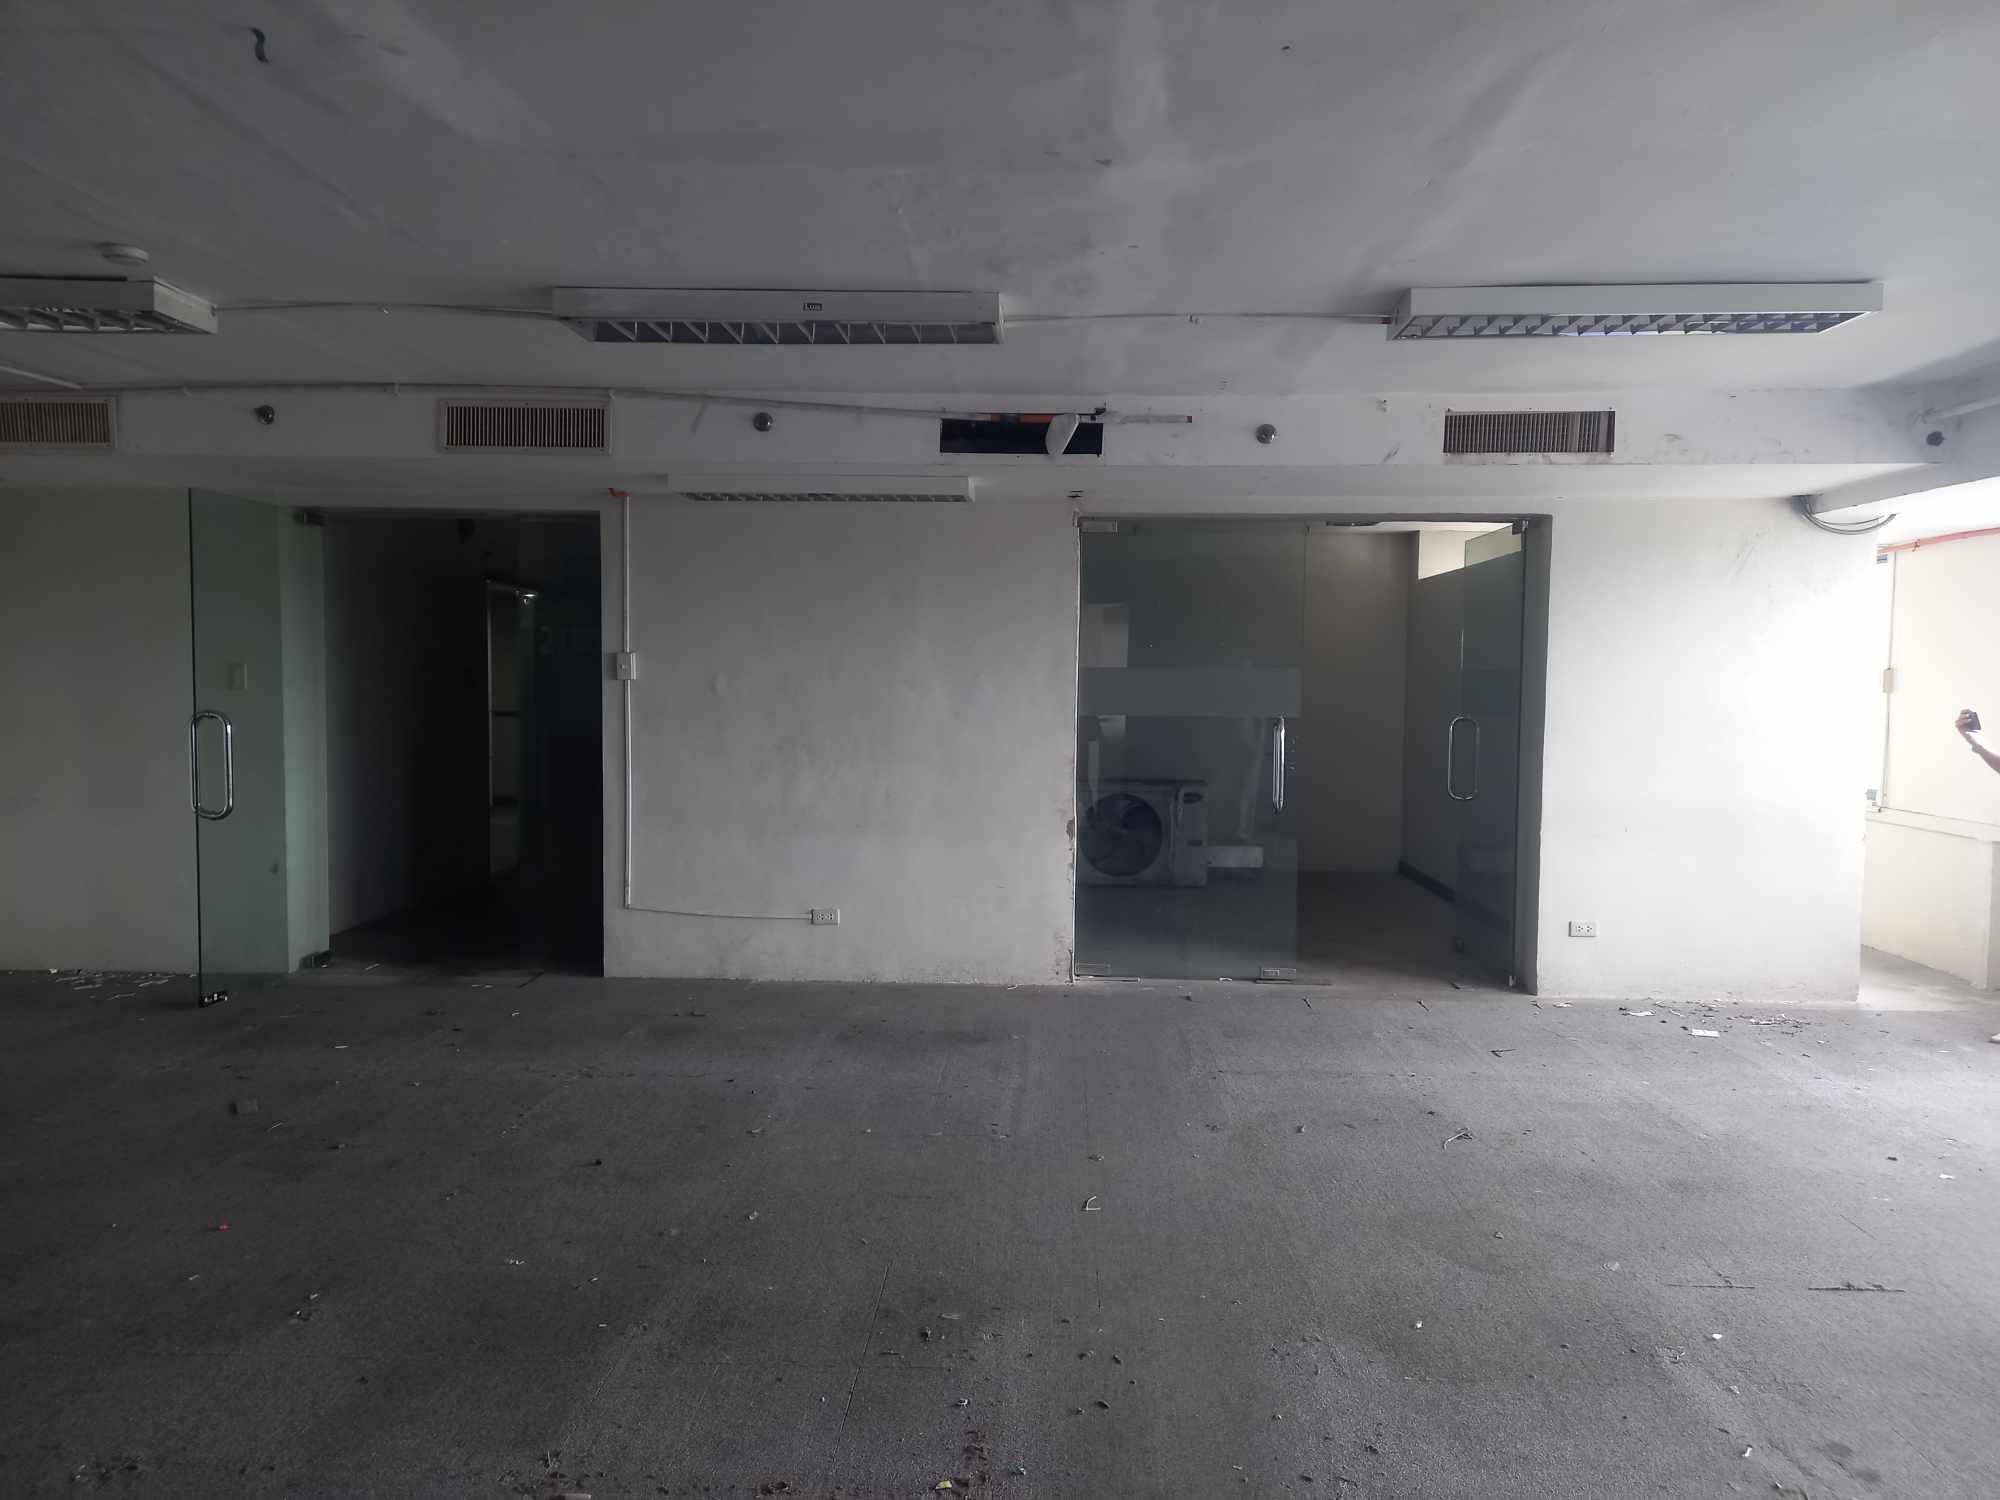 For Rent Lease Office Space Mandaluyong City Manila 160 sqm